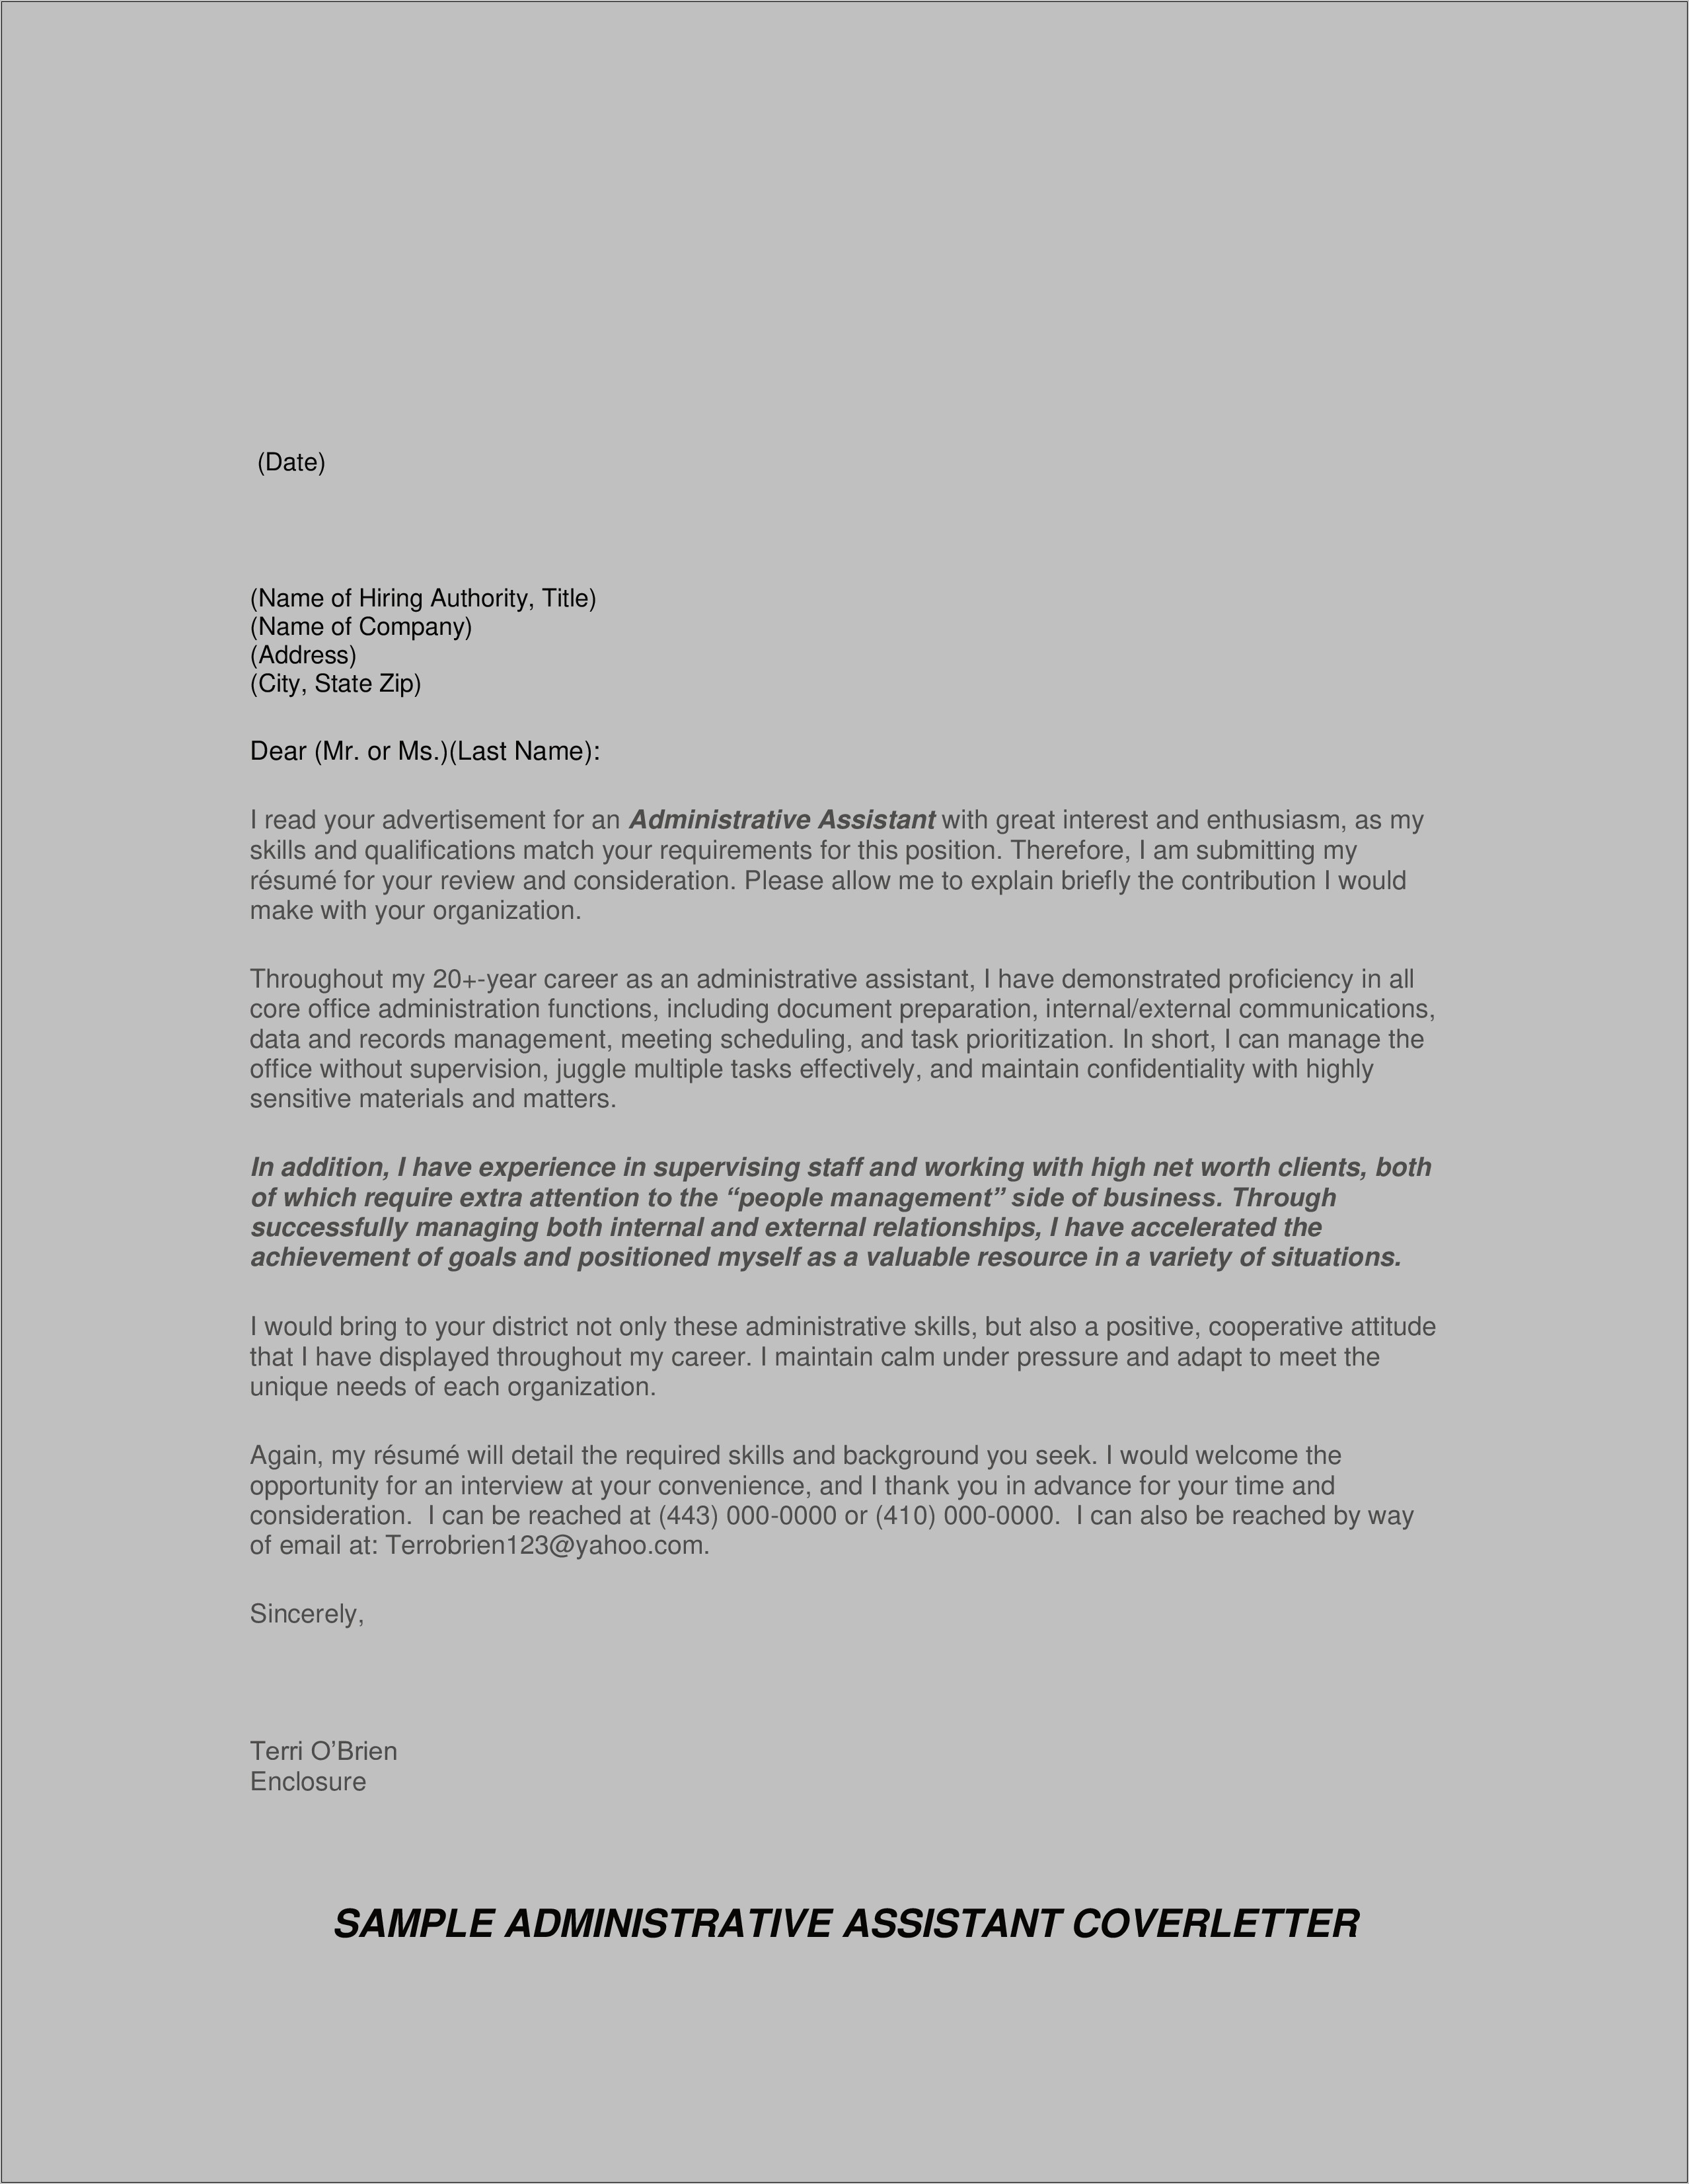 Resume Cover Letter Example Administrative Position